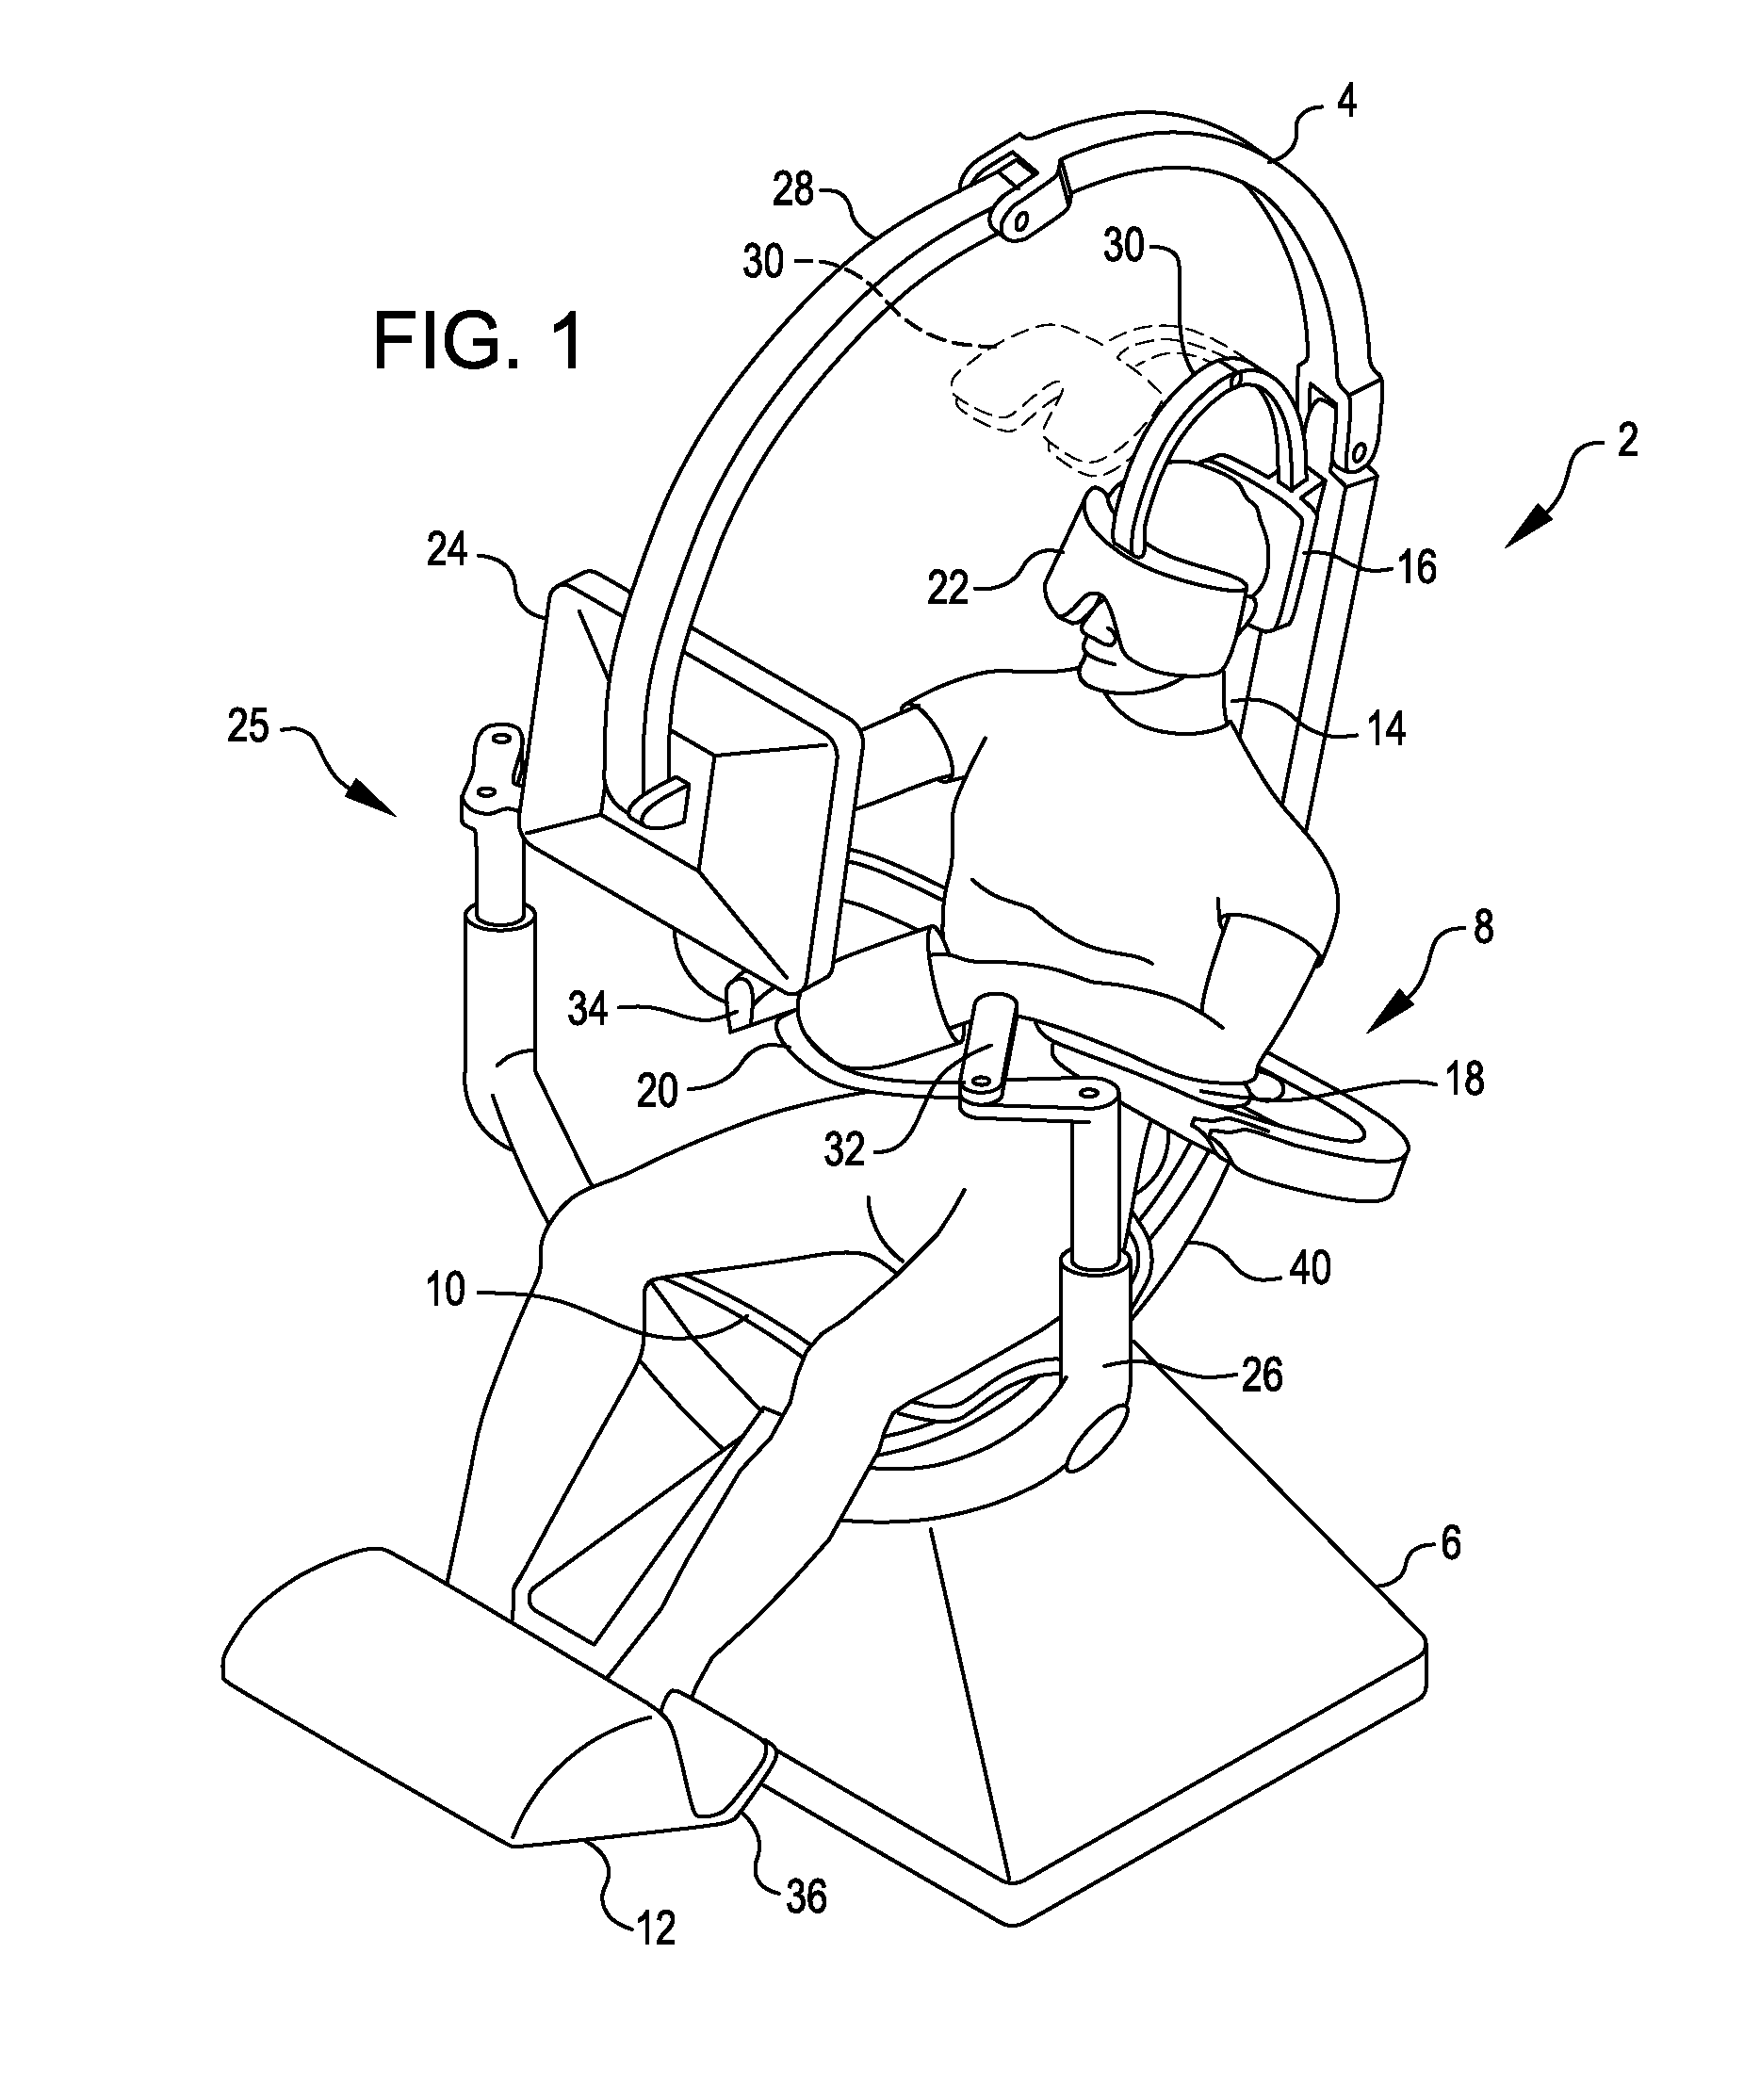 Surgical cockpit comprising multisensory and multimodal interface for robotic surgery and methods related thereto